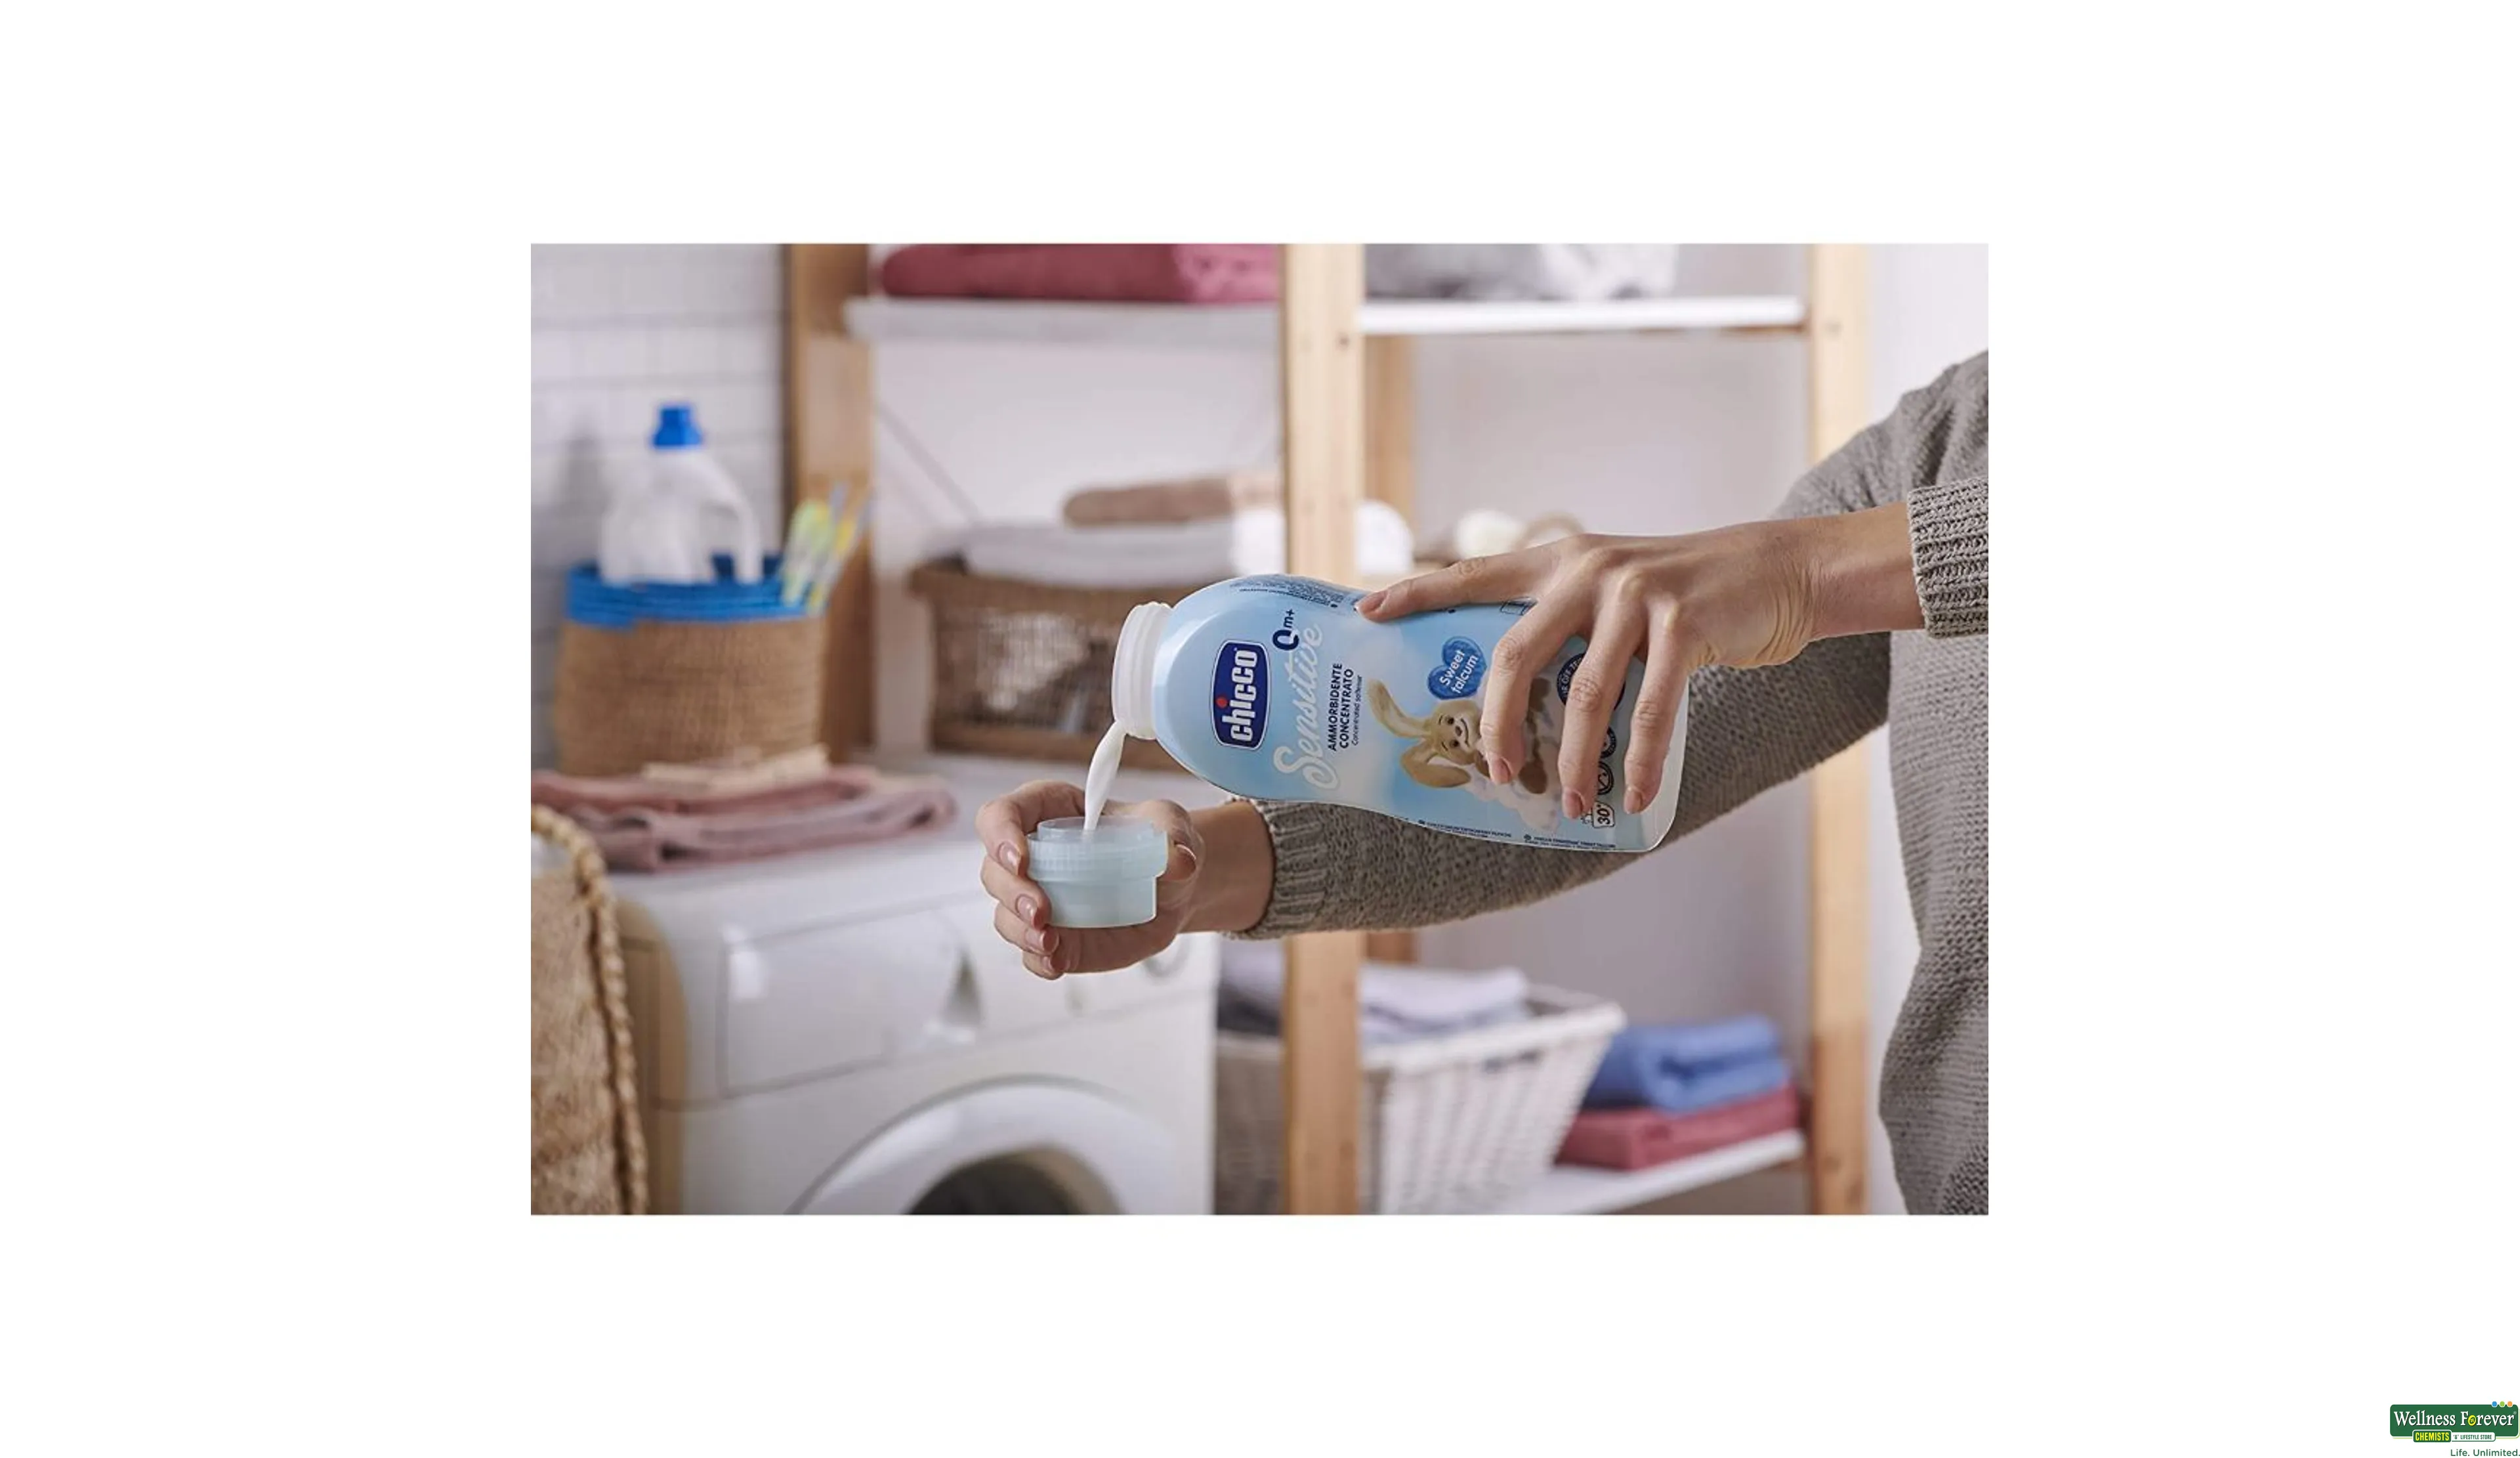 Buy Chicco Softener Sweet Talcum, 750 ml Online at Best Prices